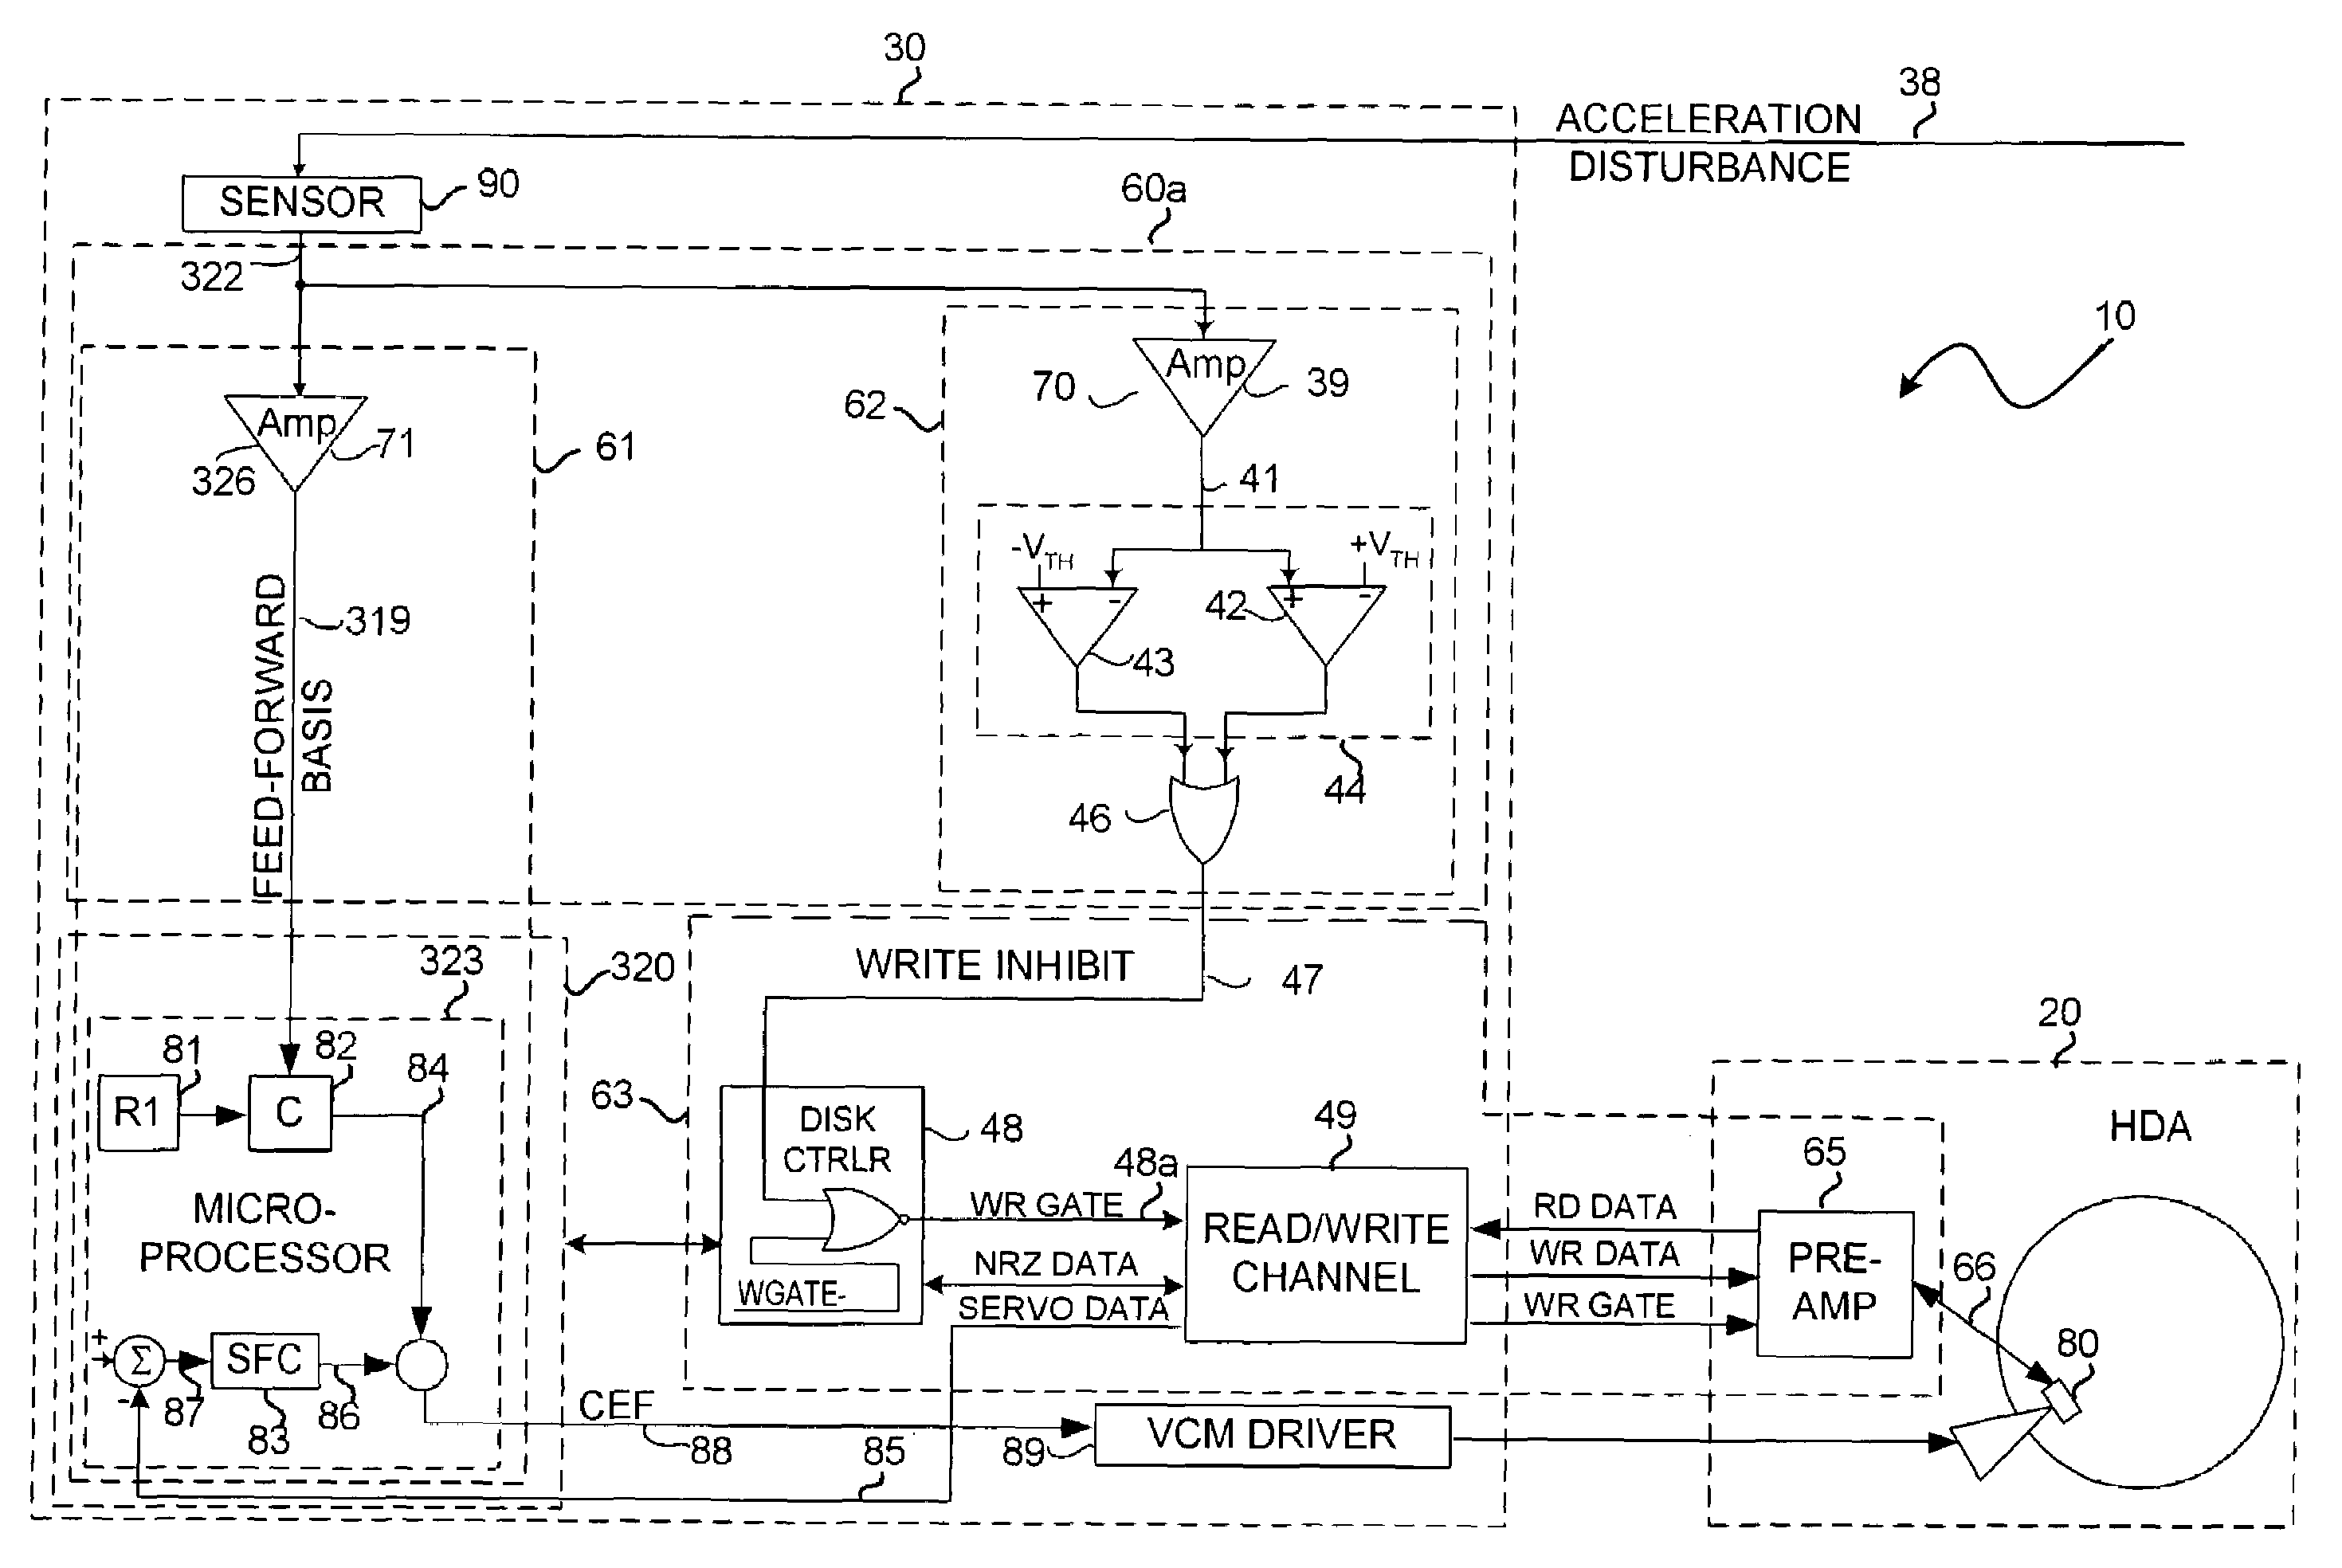 Acceleration disturbance detection subsystem for use with disk drives